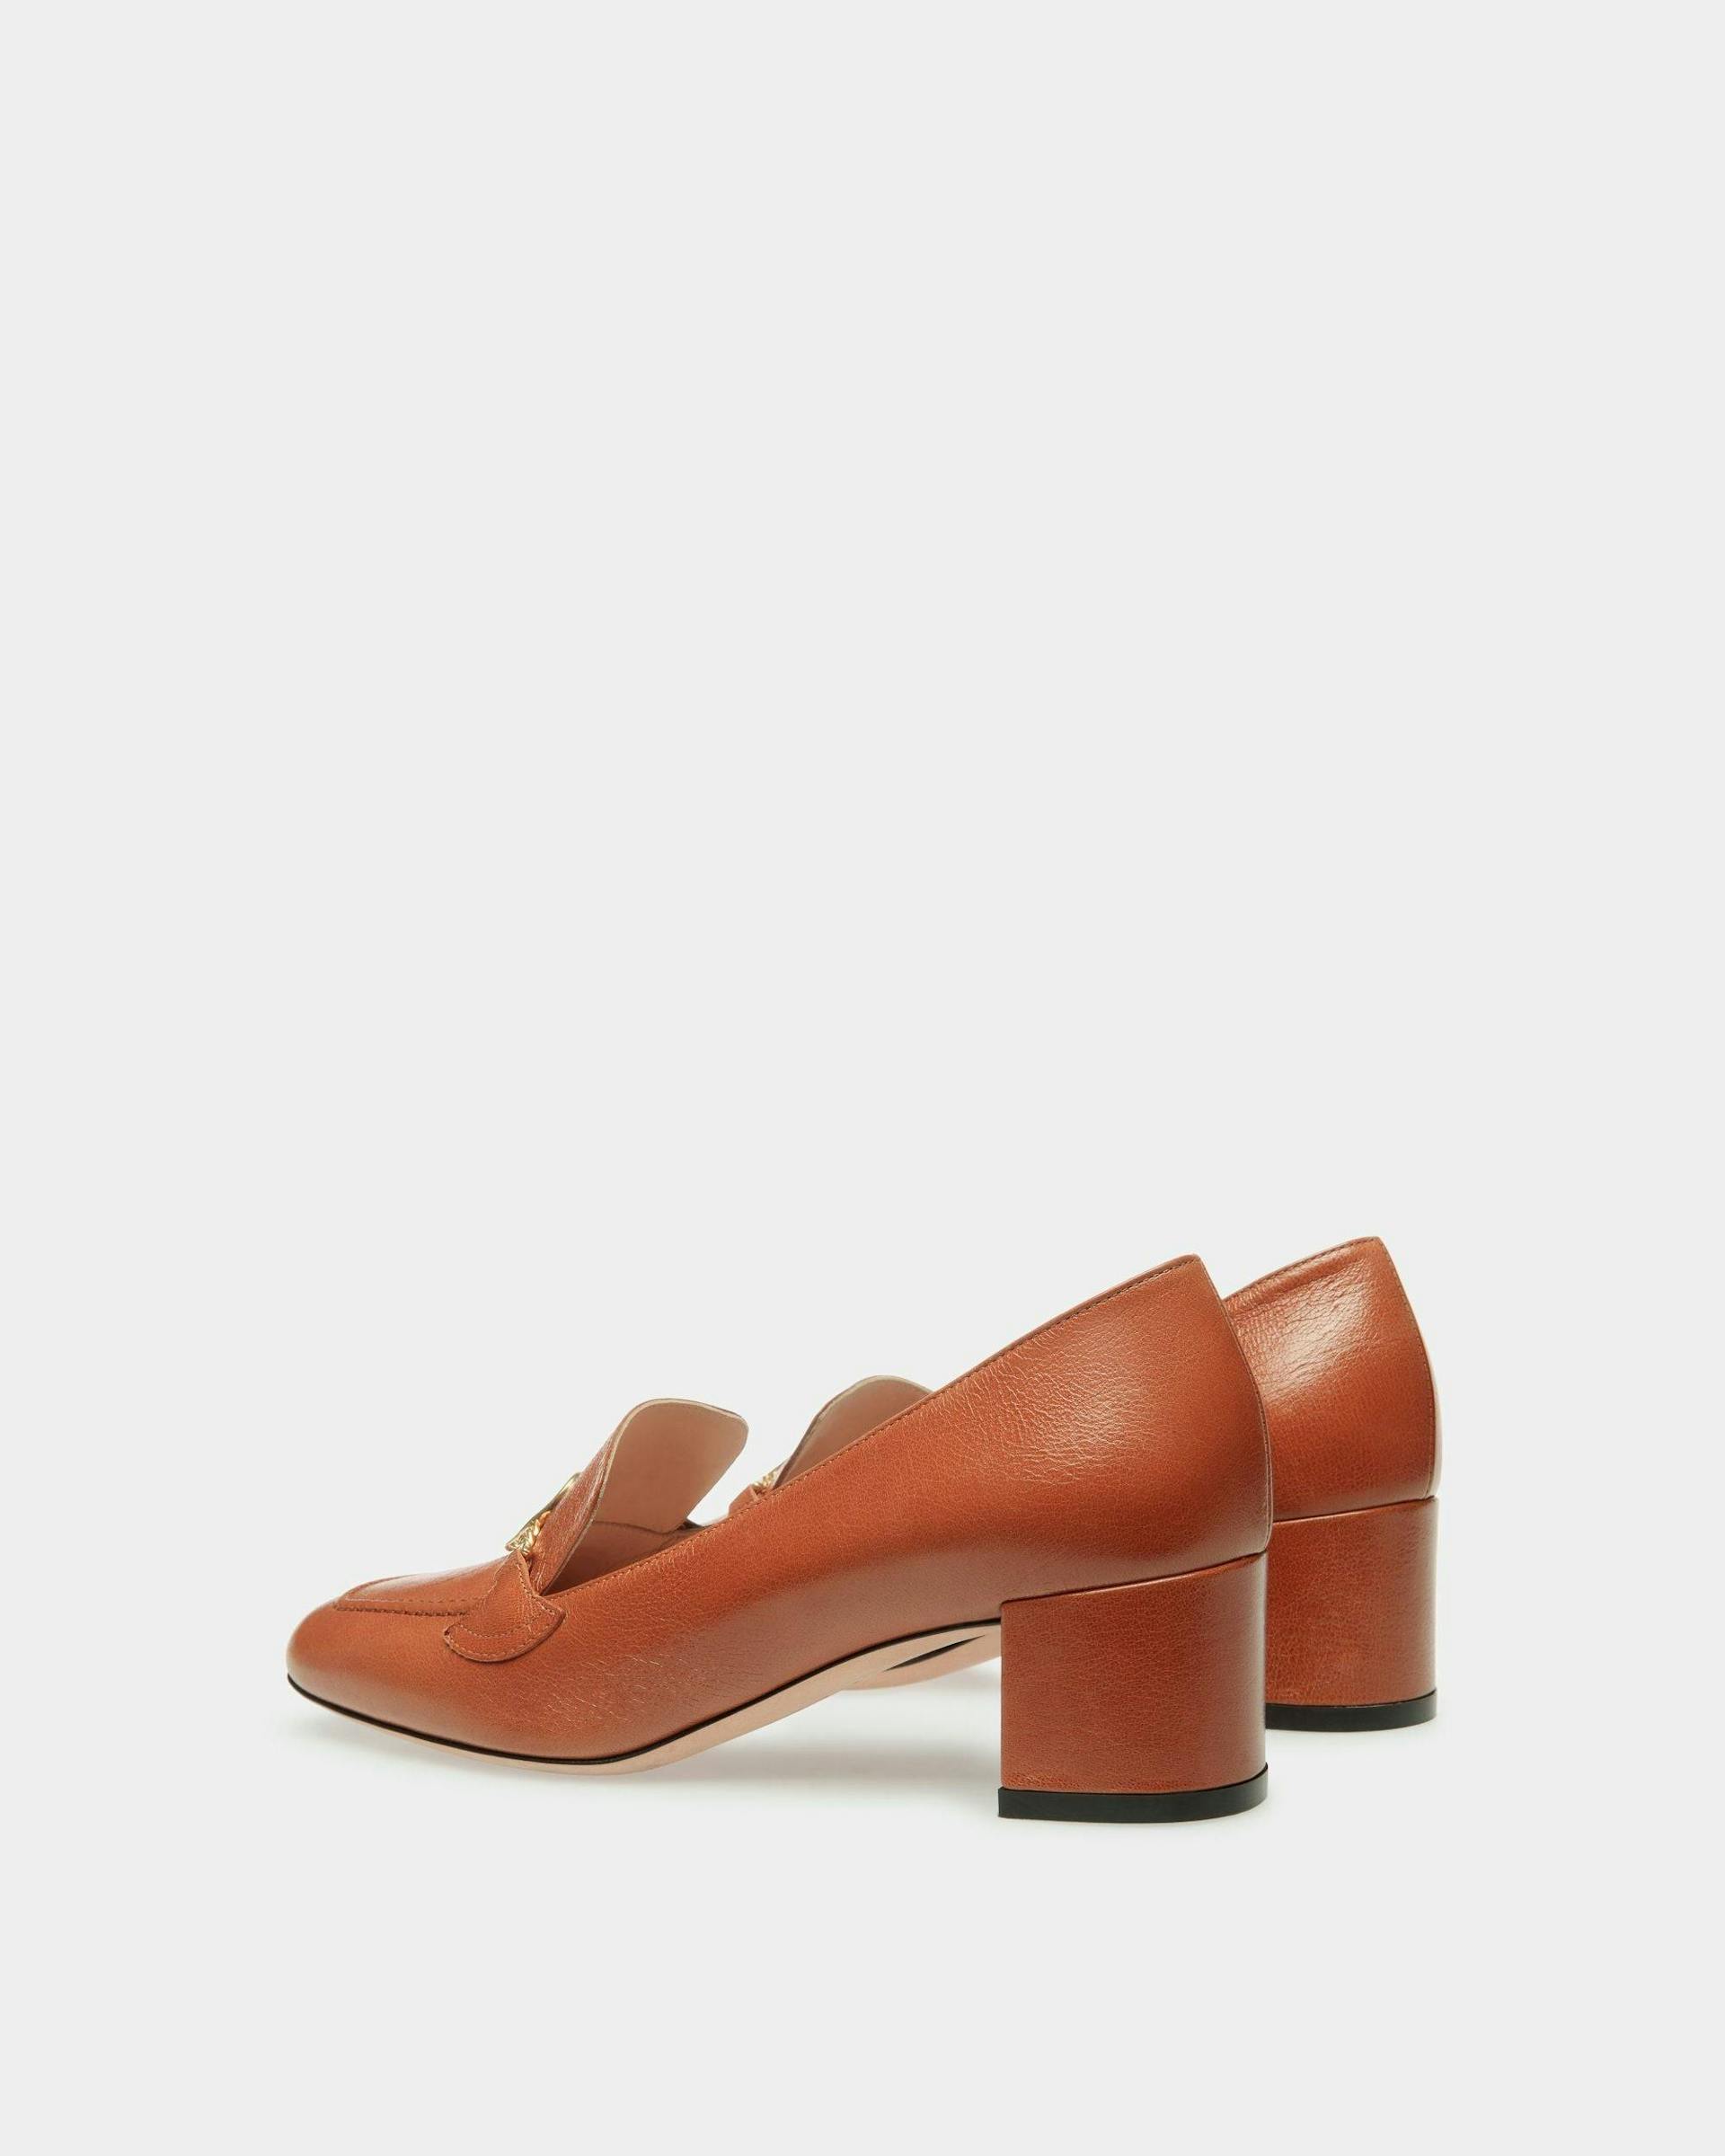 Women's Emblem Pumps In Brown Leather | Bally | Still Life 3/4 Back